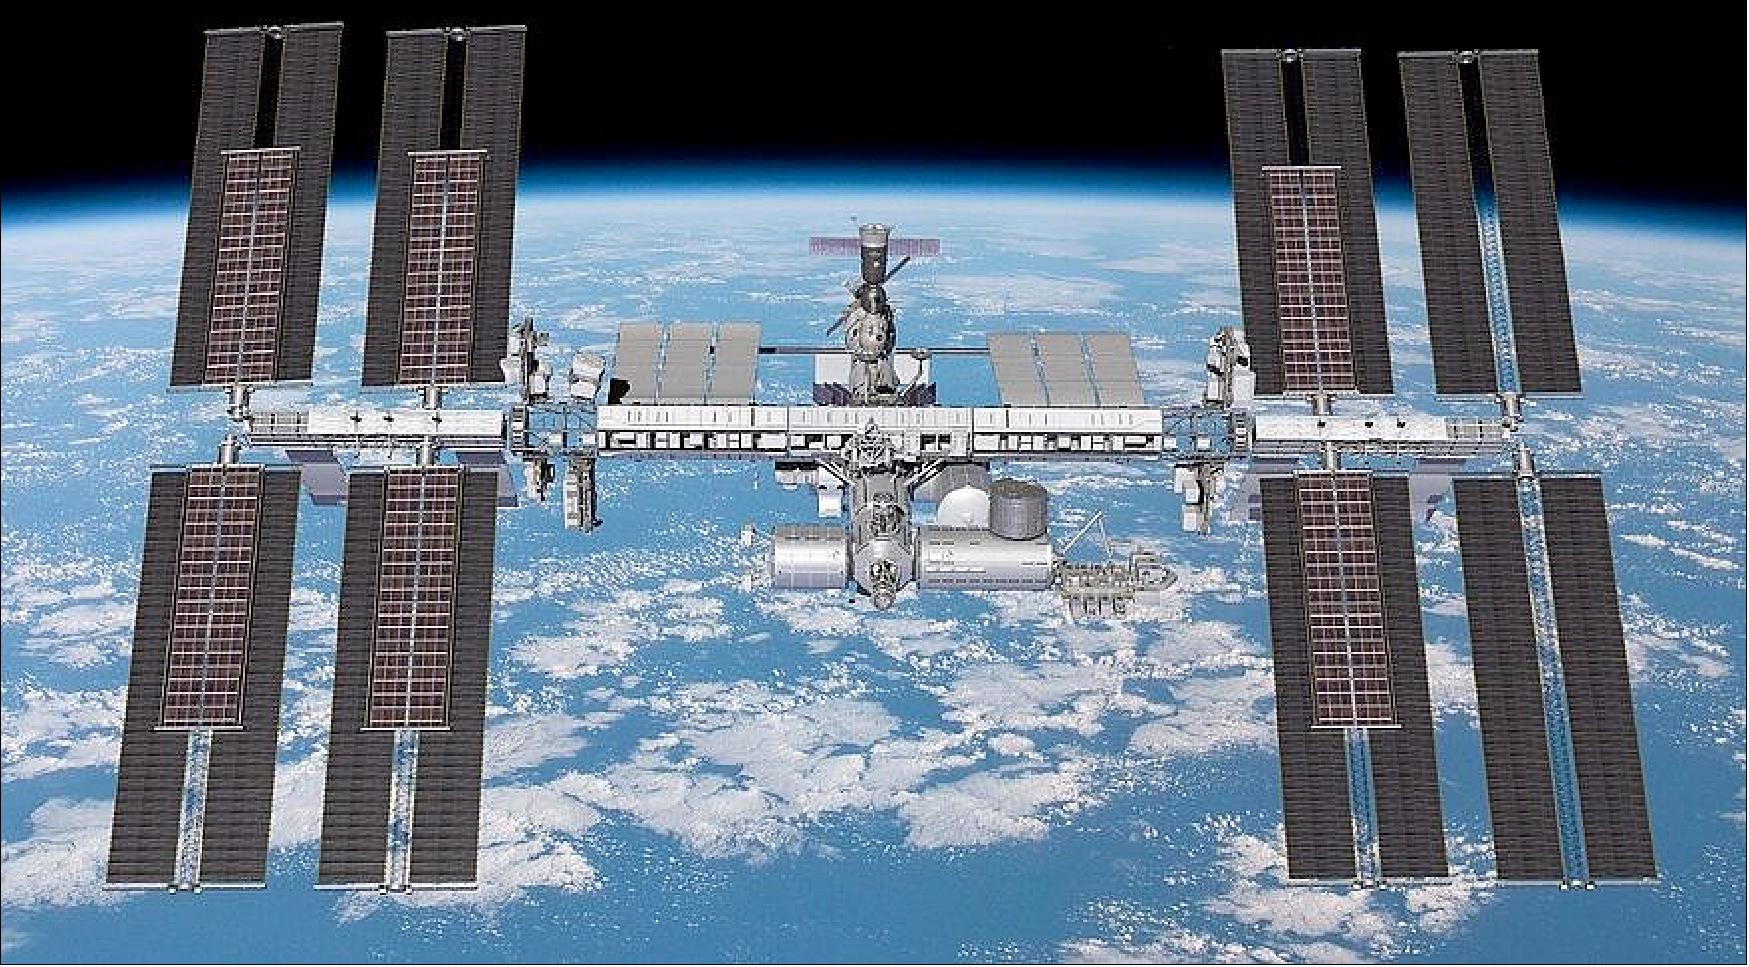 Figure 15: An illustration of the International Space Station after the installation of six new solar arrays on top of its existing solar panels (image credit: Boeing)